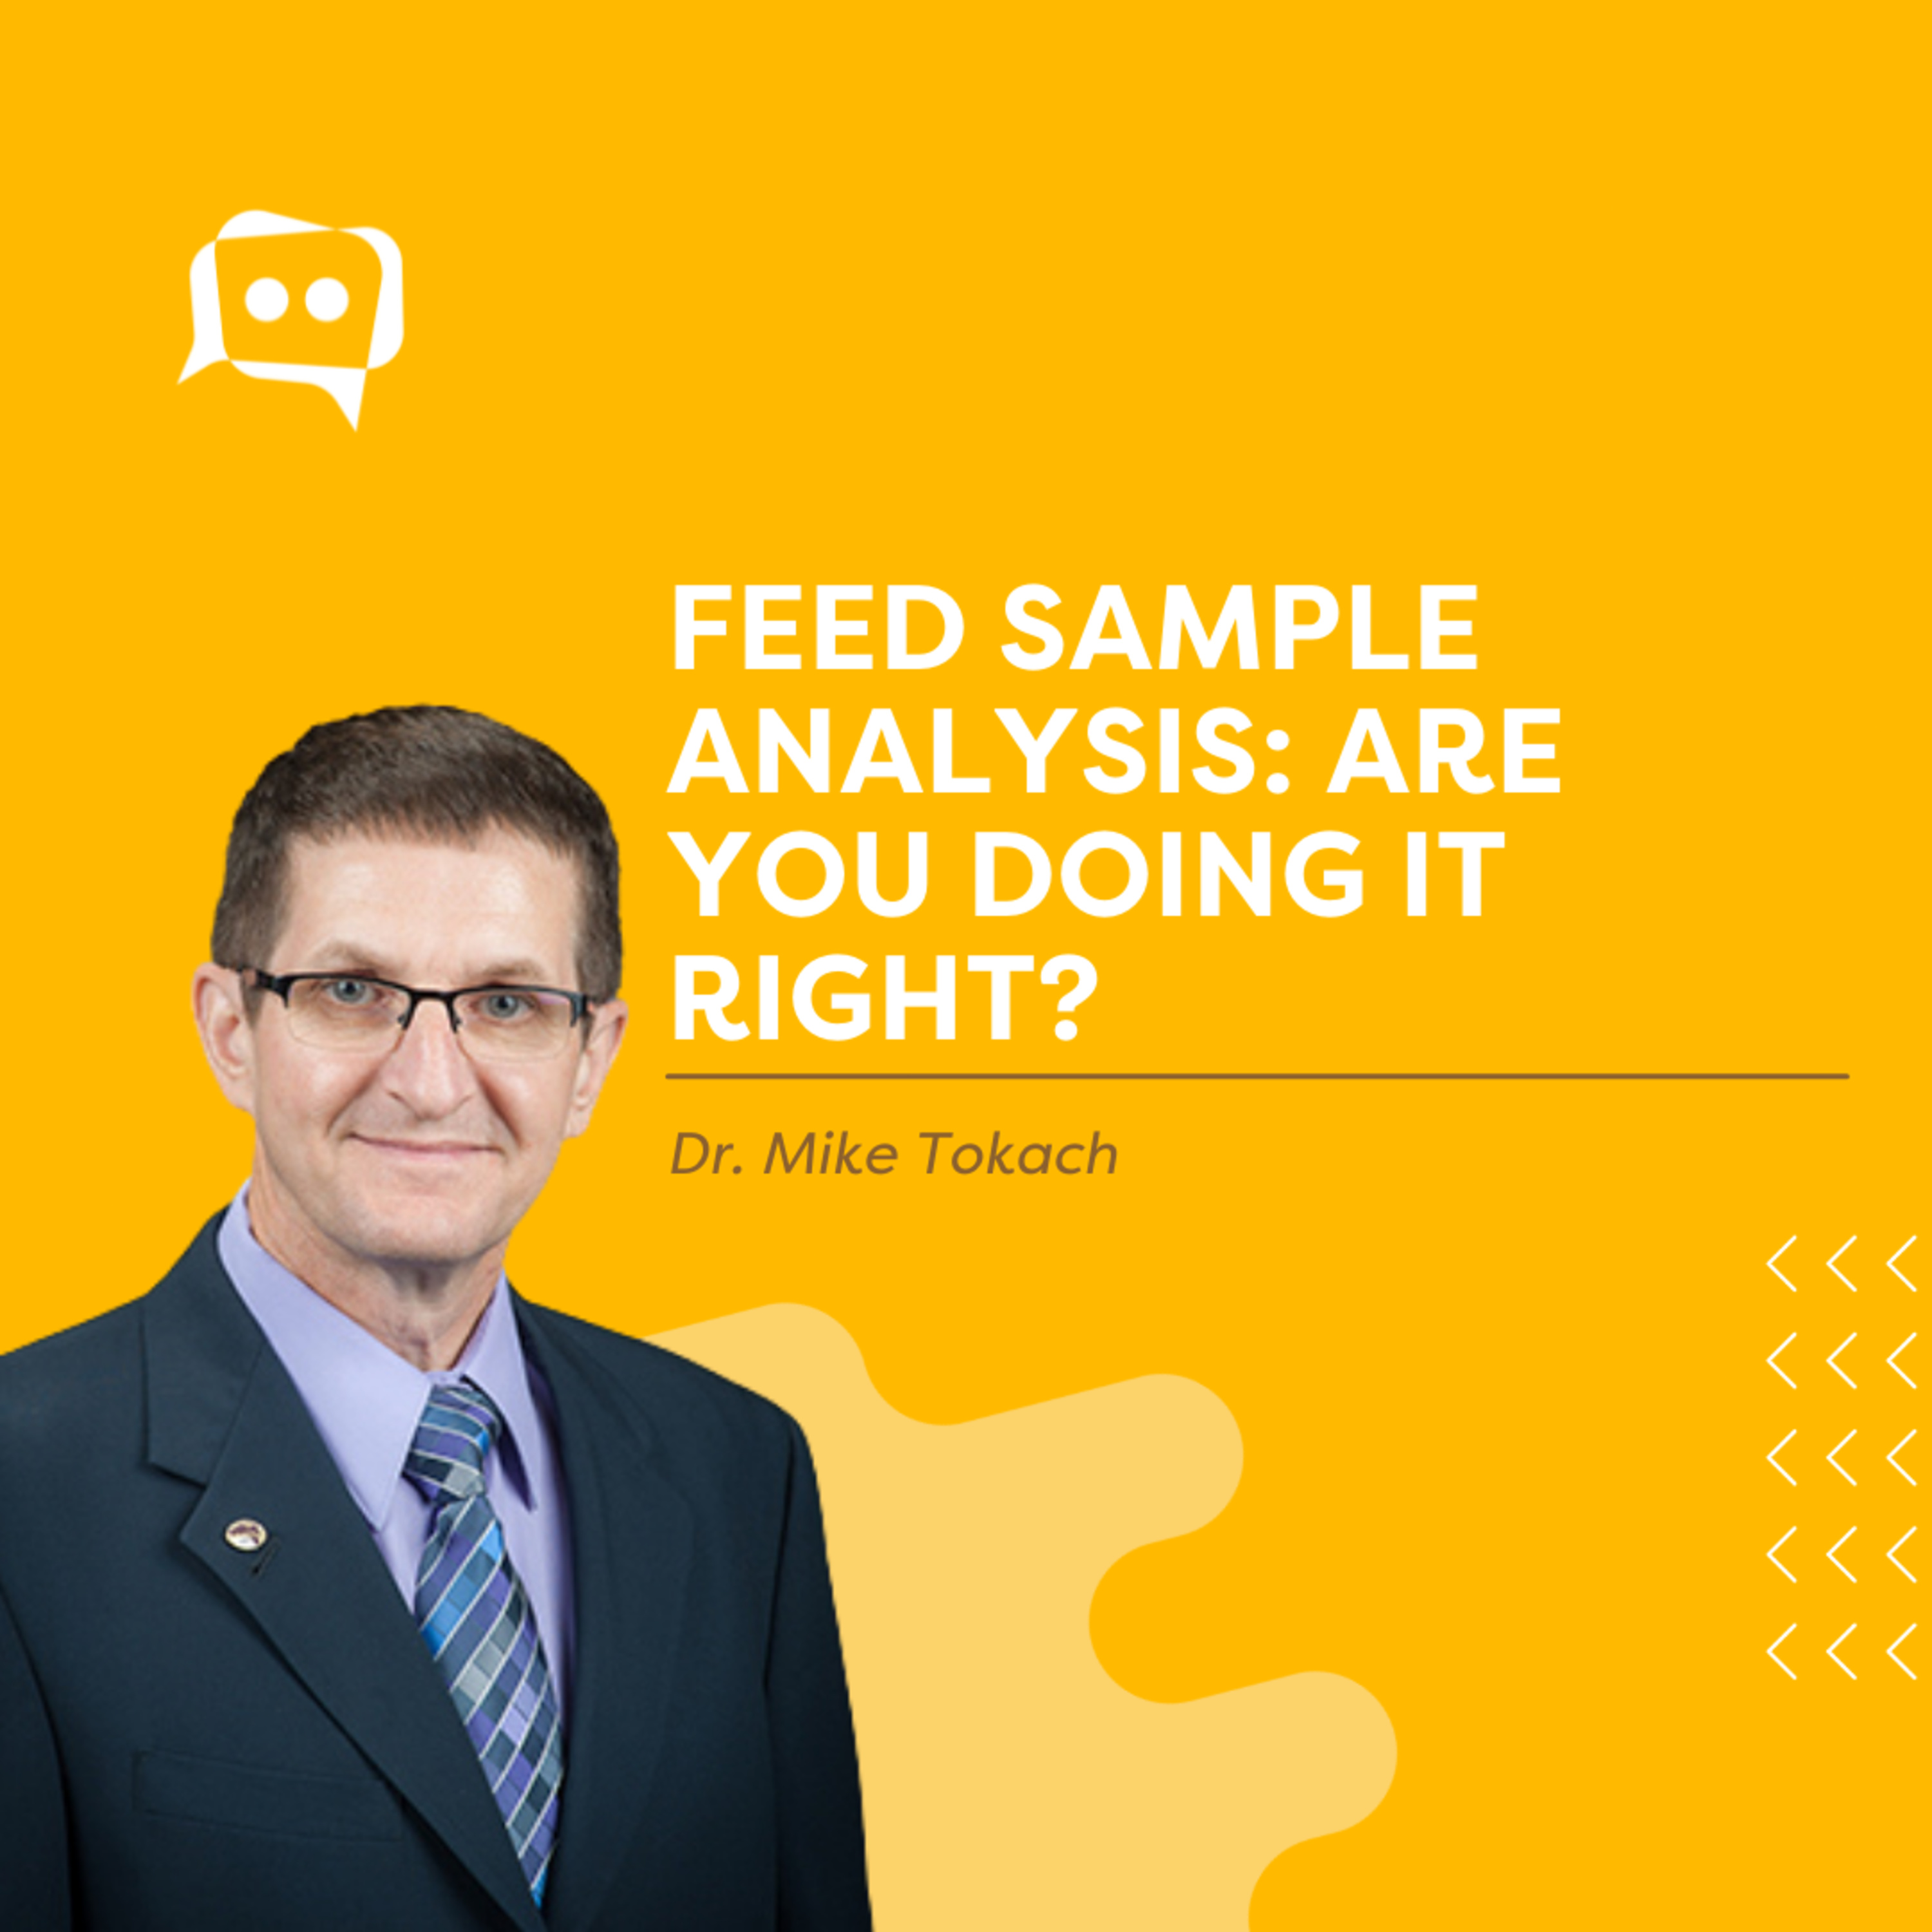 #SHORTS: Feed sample analysis: are you doing it right? With Dr. Mike Tokach